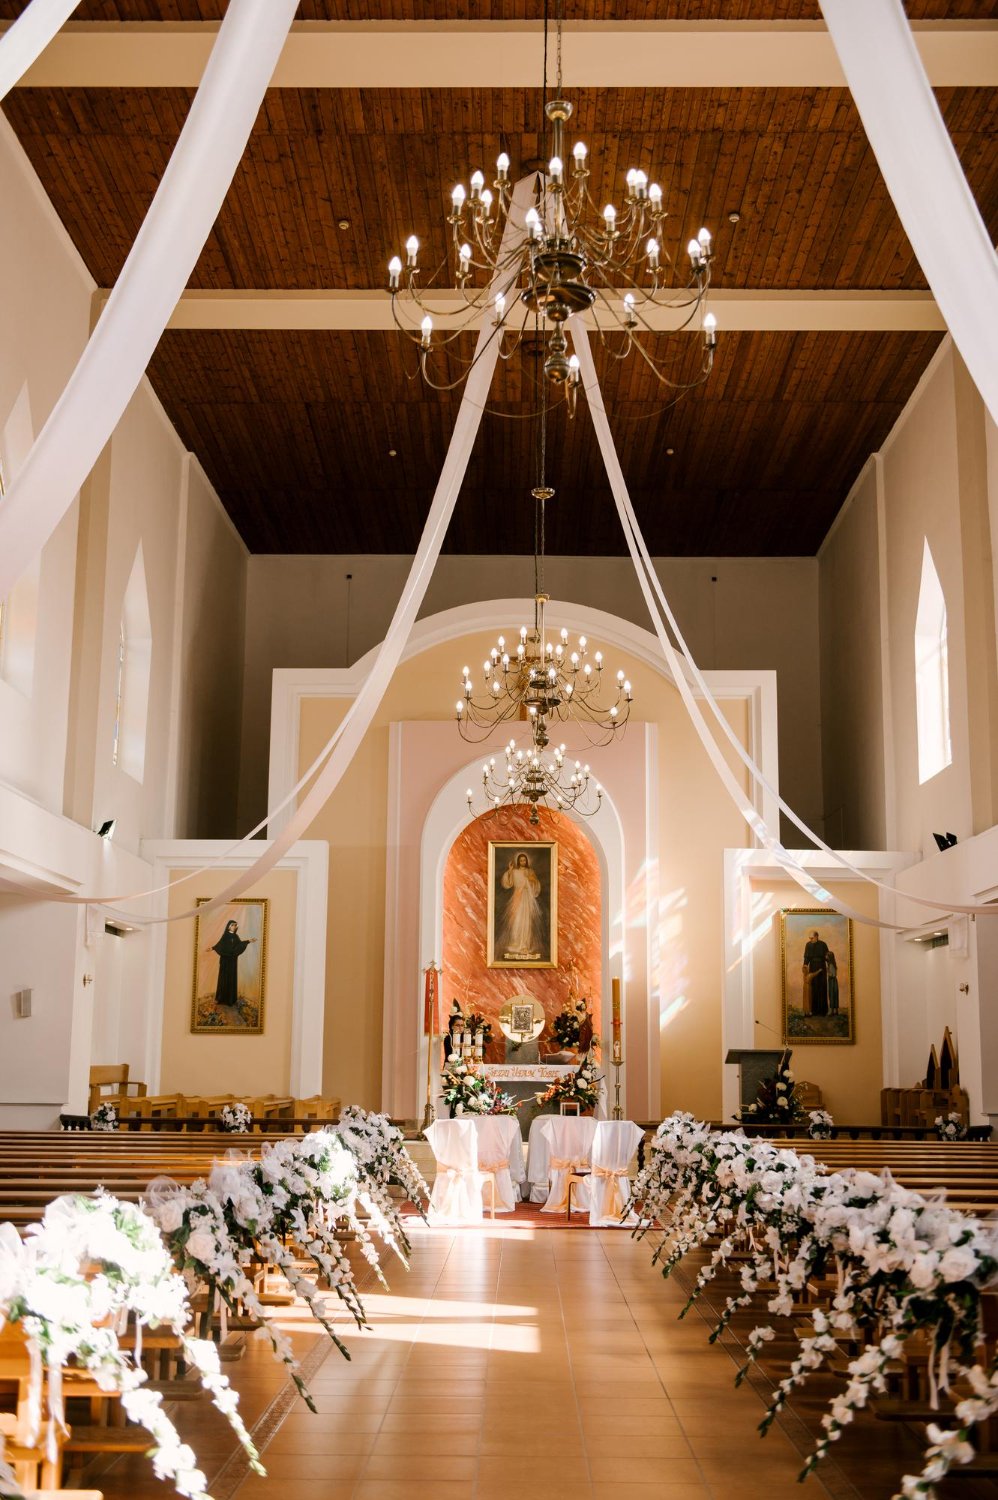 the church is decorated for the wedding